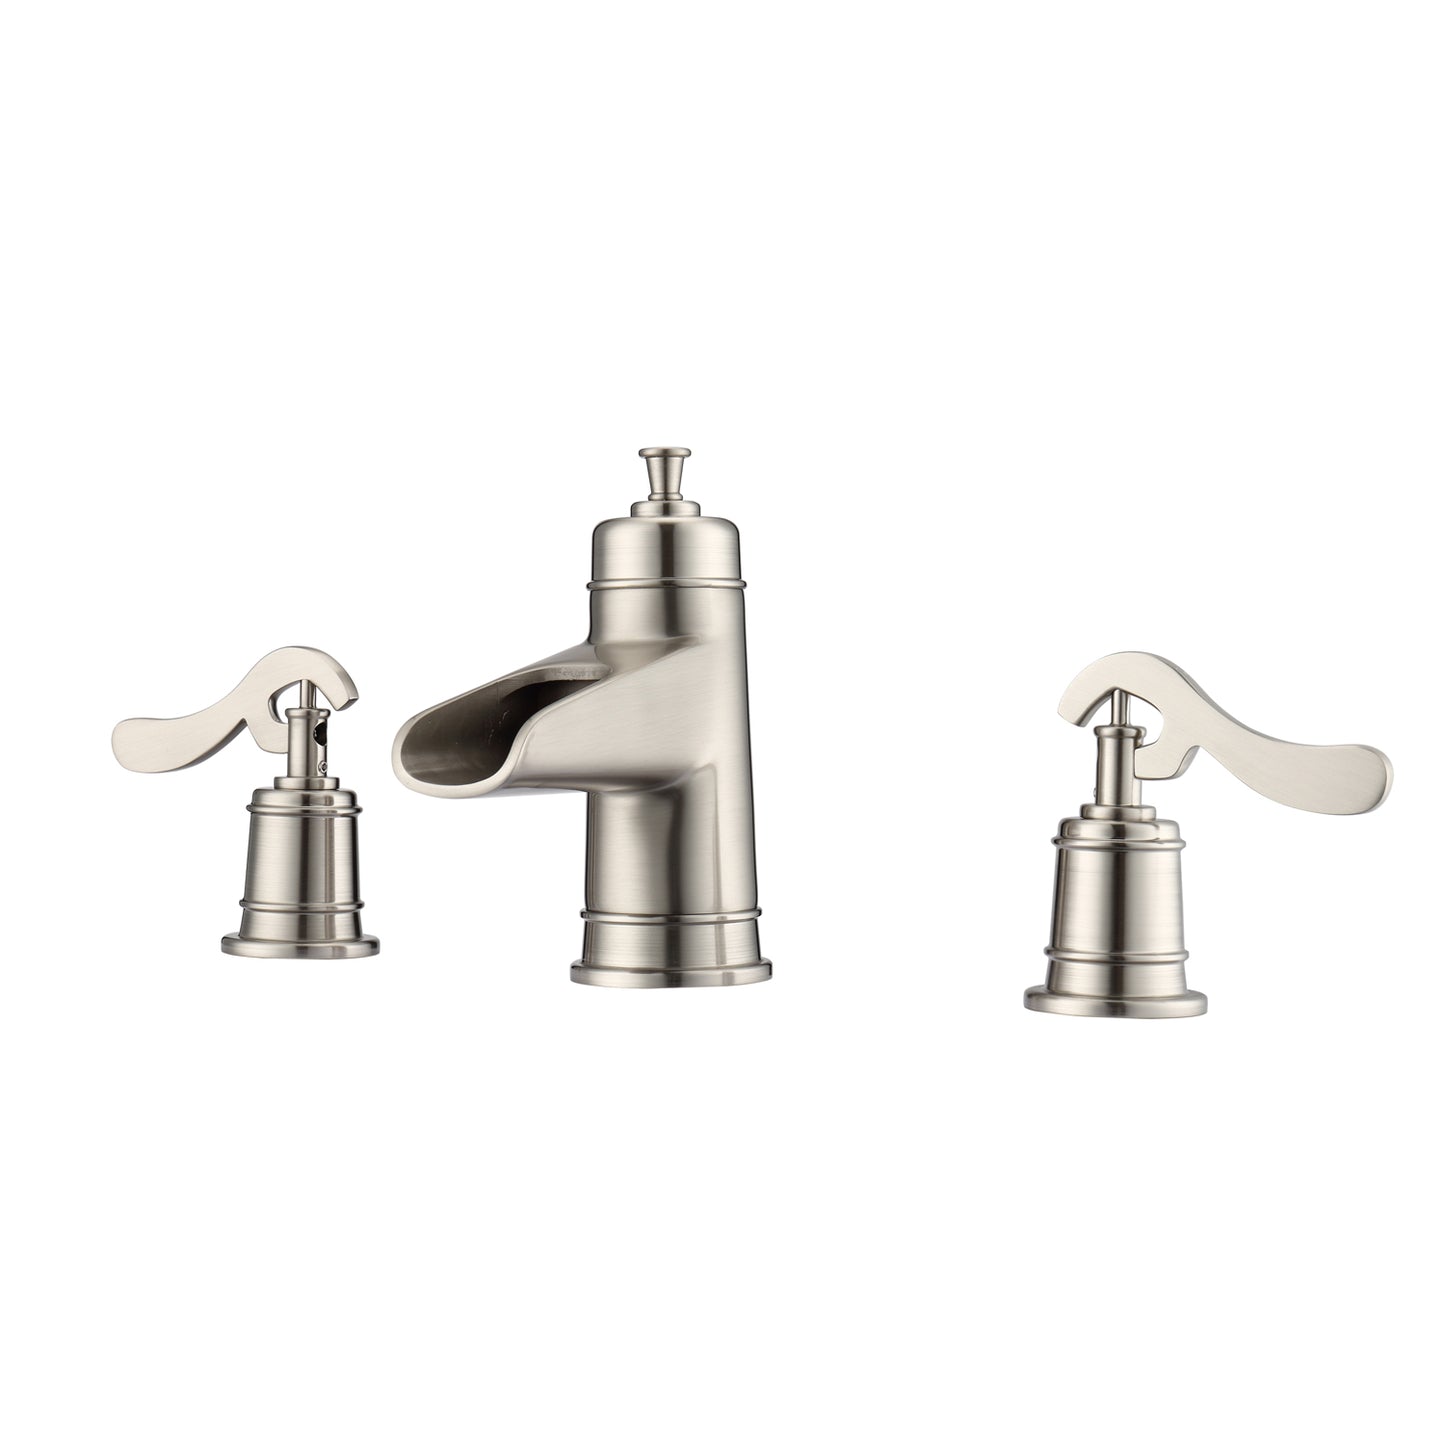 Batson 8" Widespread Brushed Nickel Bathroom Faucet with Lever Handles